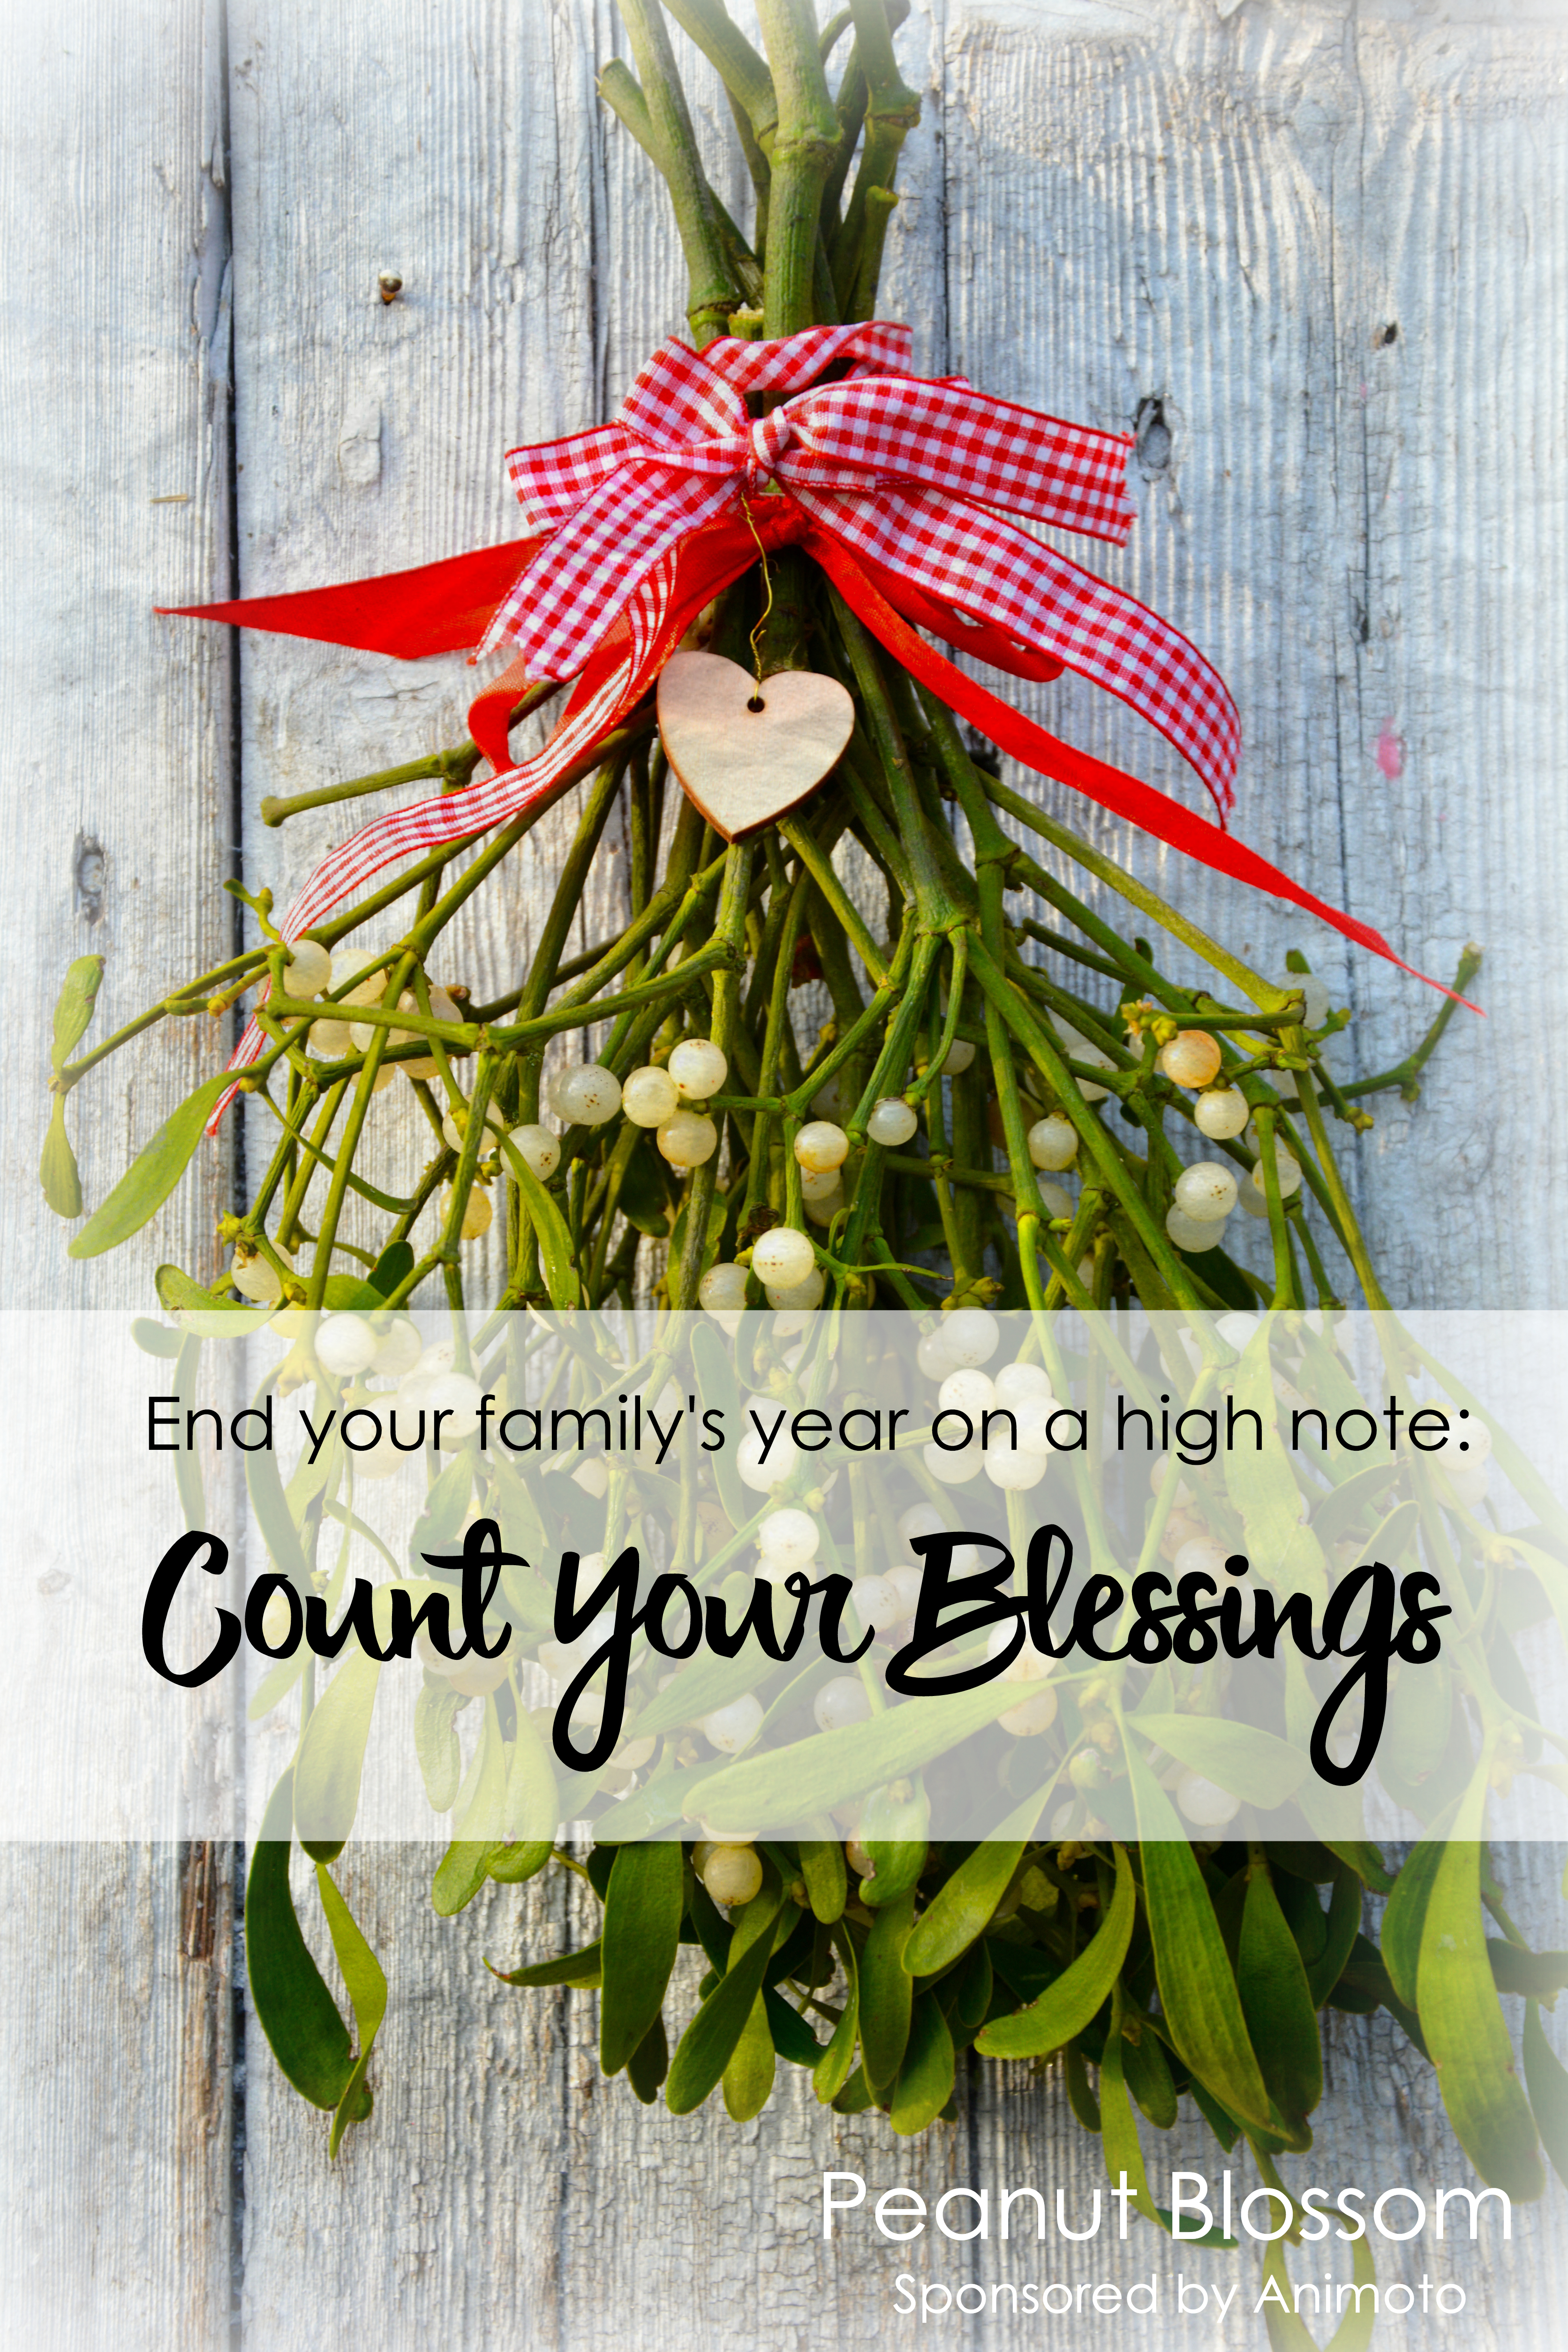 Family gratitude project: Count your blessings before the new year bells ring